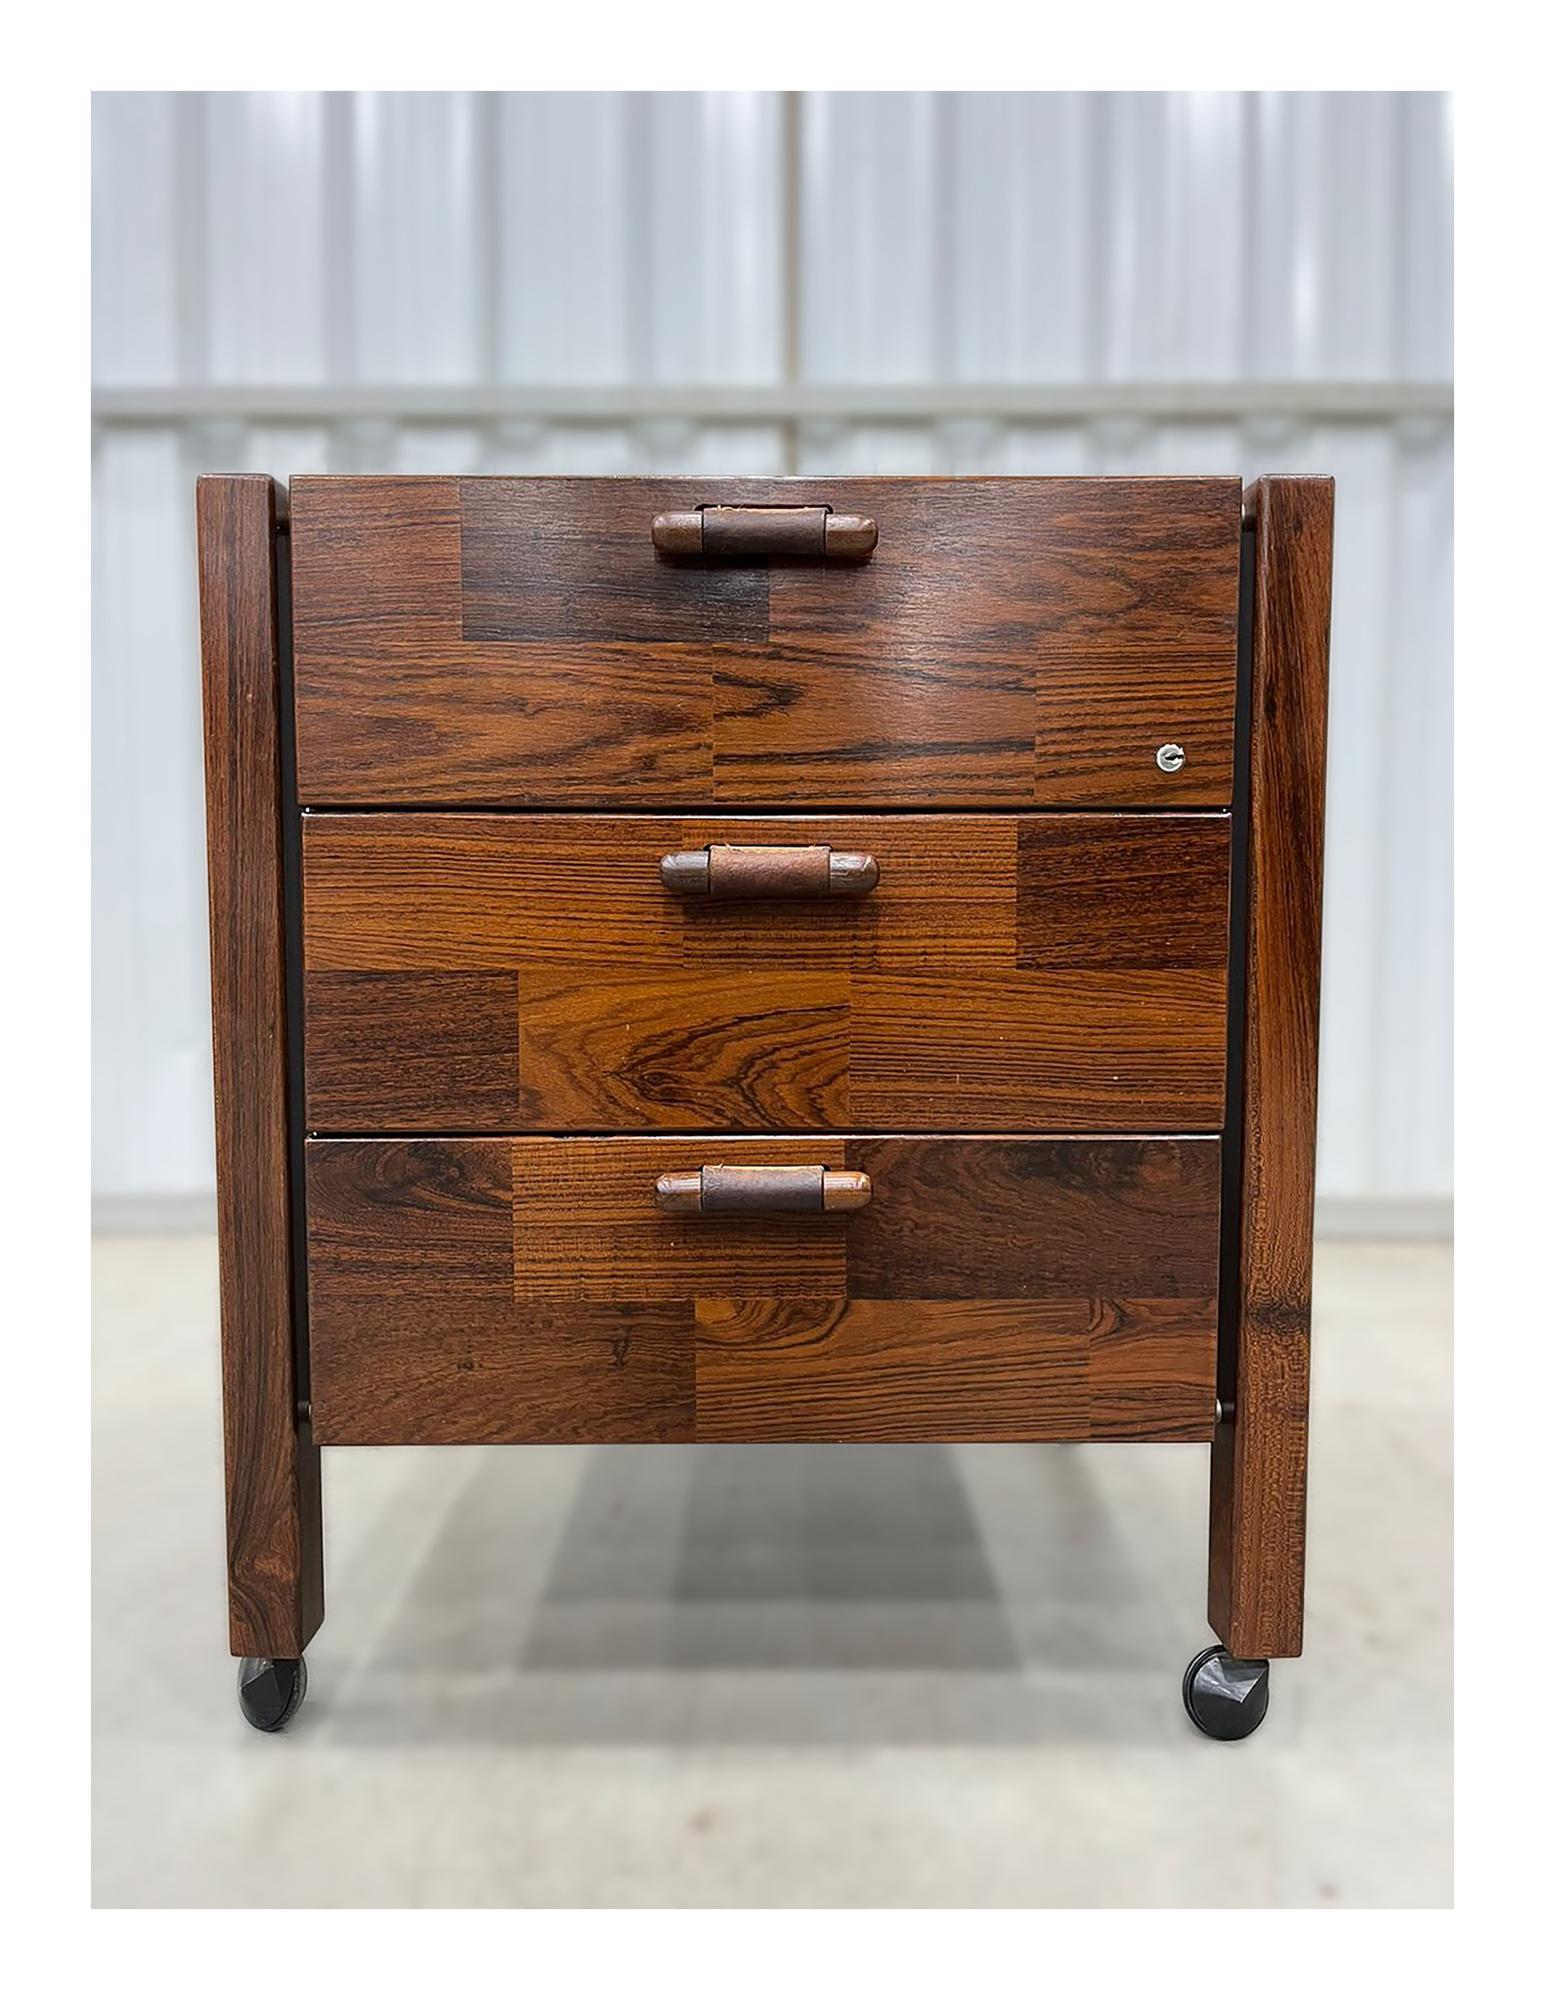 Immediately available with complementary shipping n NYC area this Brazilian modern filing cabinet in Rosewood and leather is a true beauty!

This filing cabinet was designed by Jorge Zalszupin and has three drawers with a leather handles, four